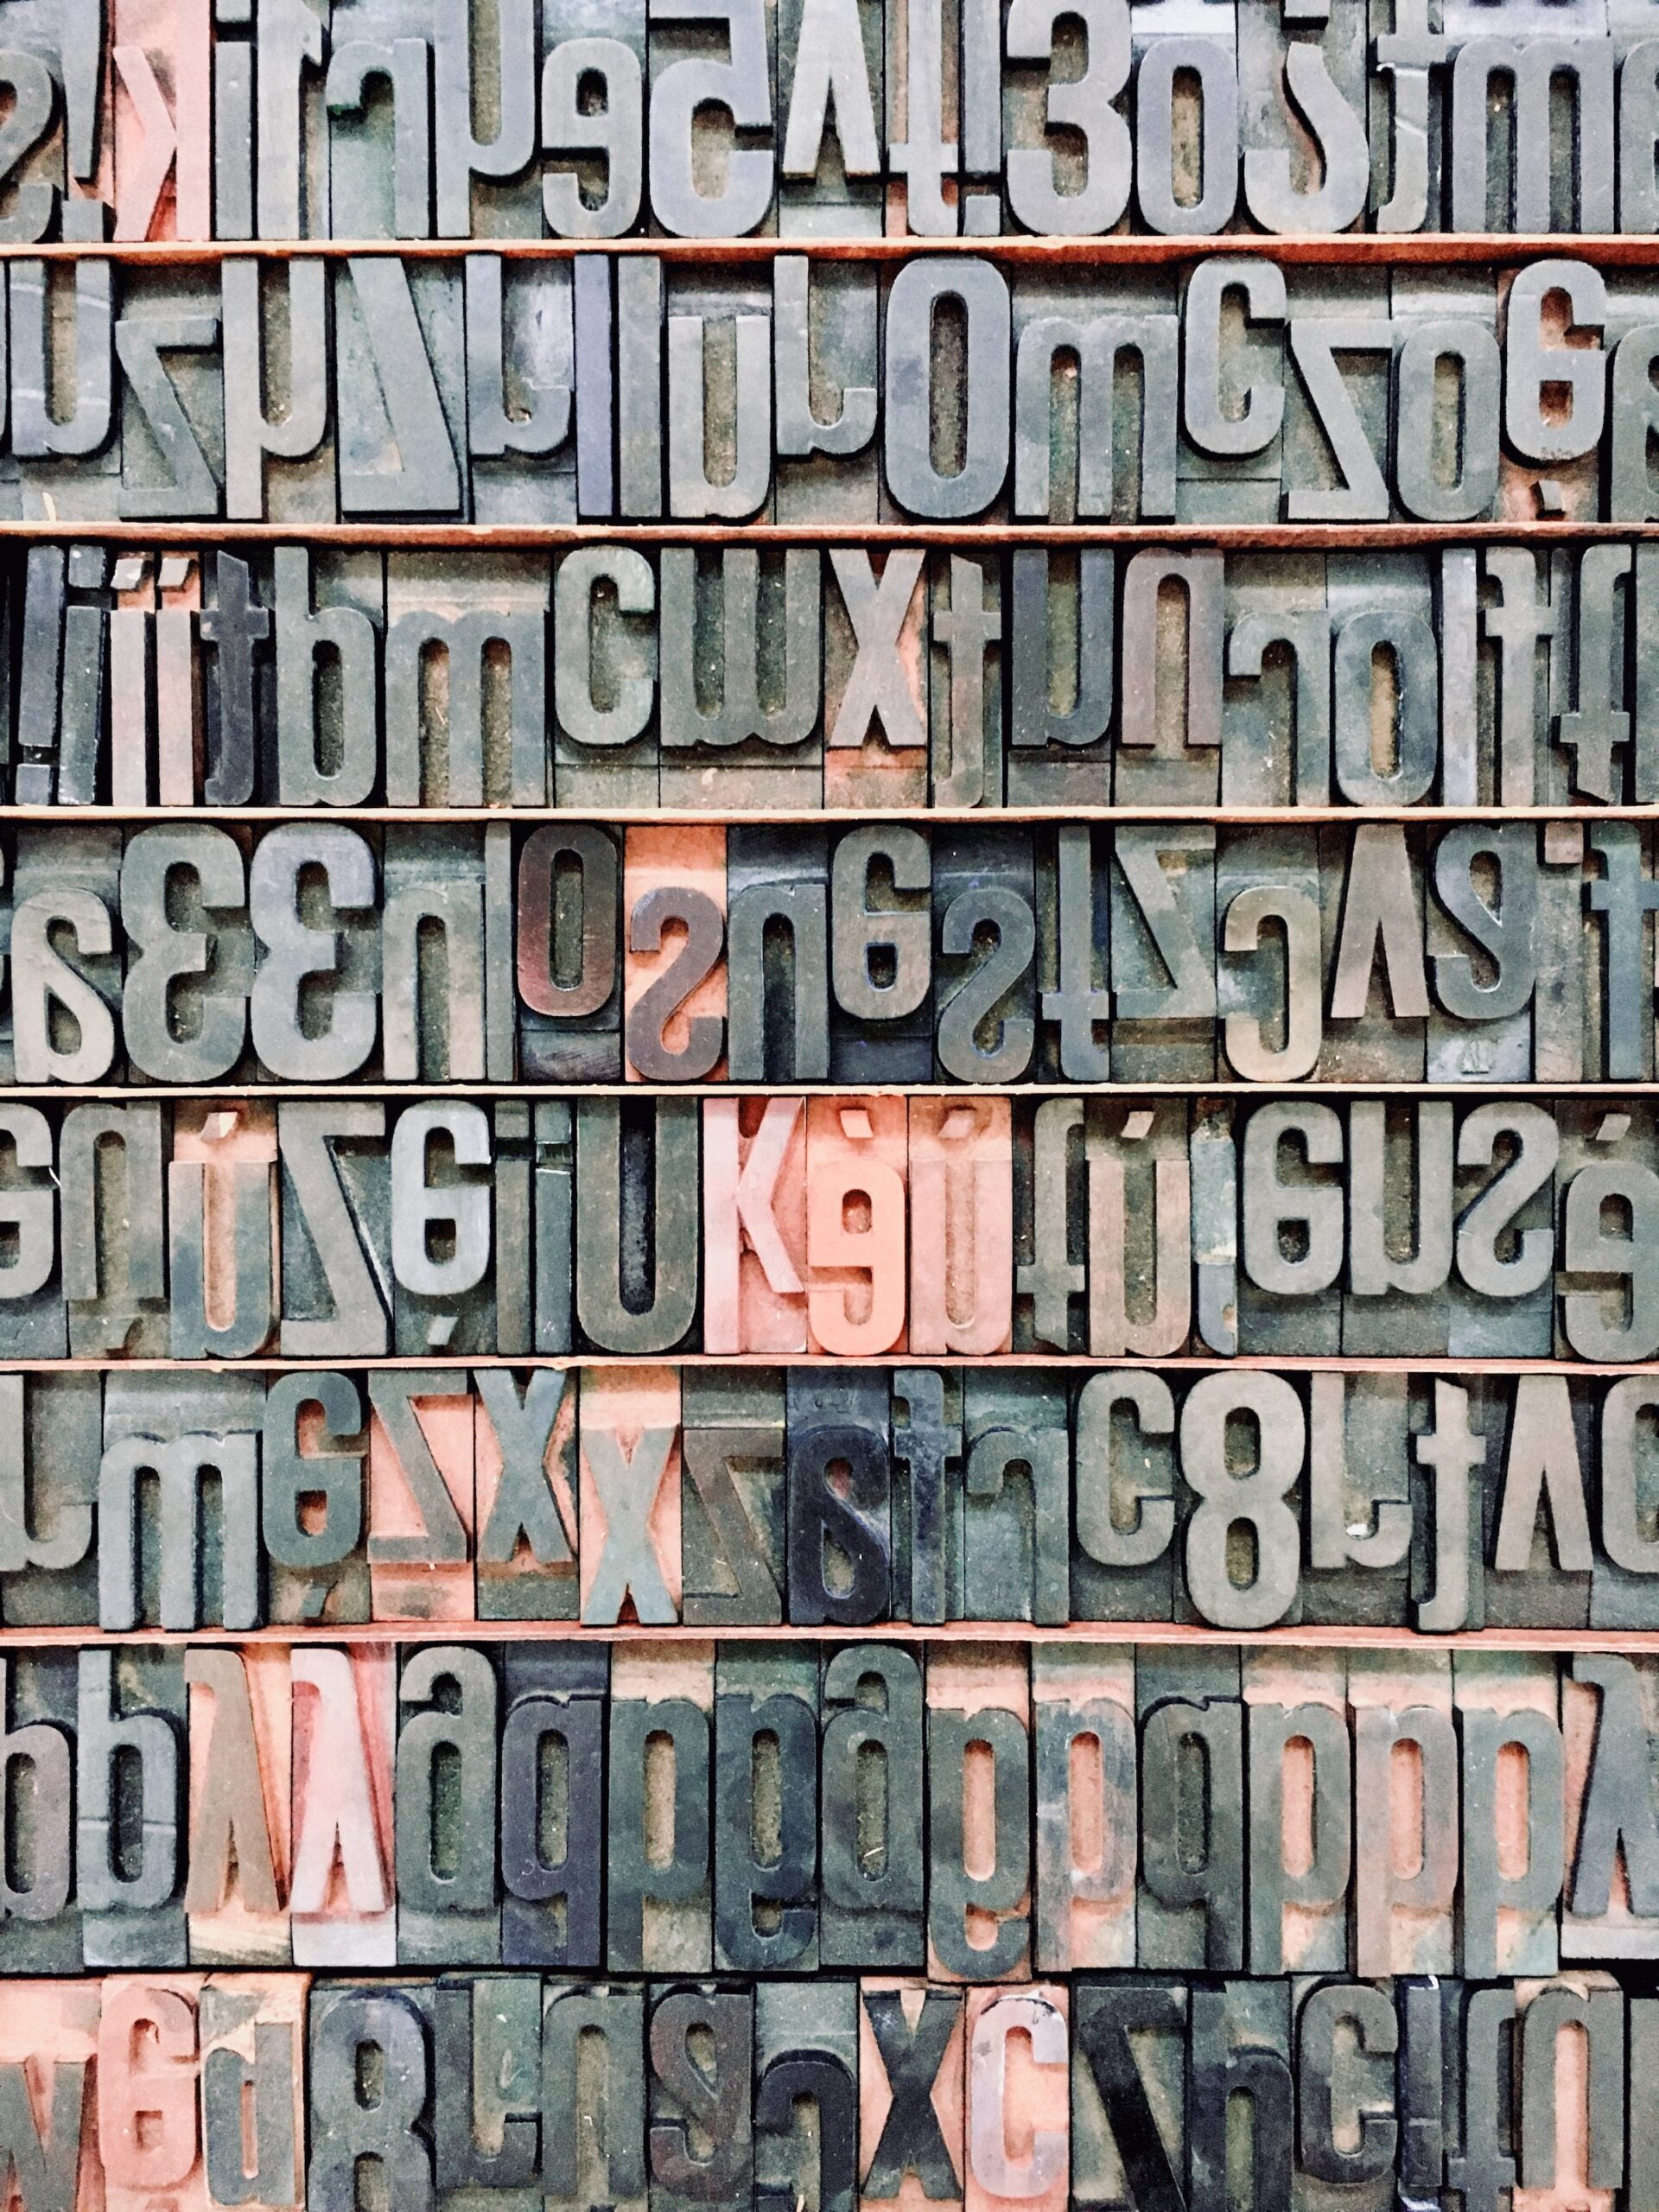 A case of type from a traditional printing press